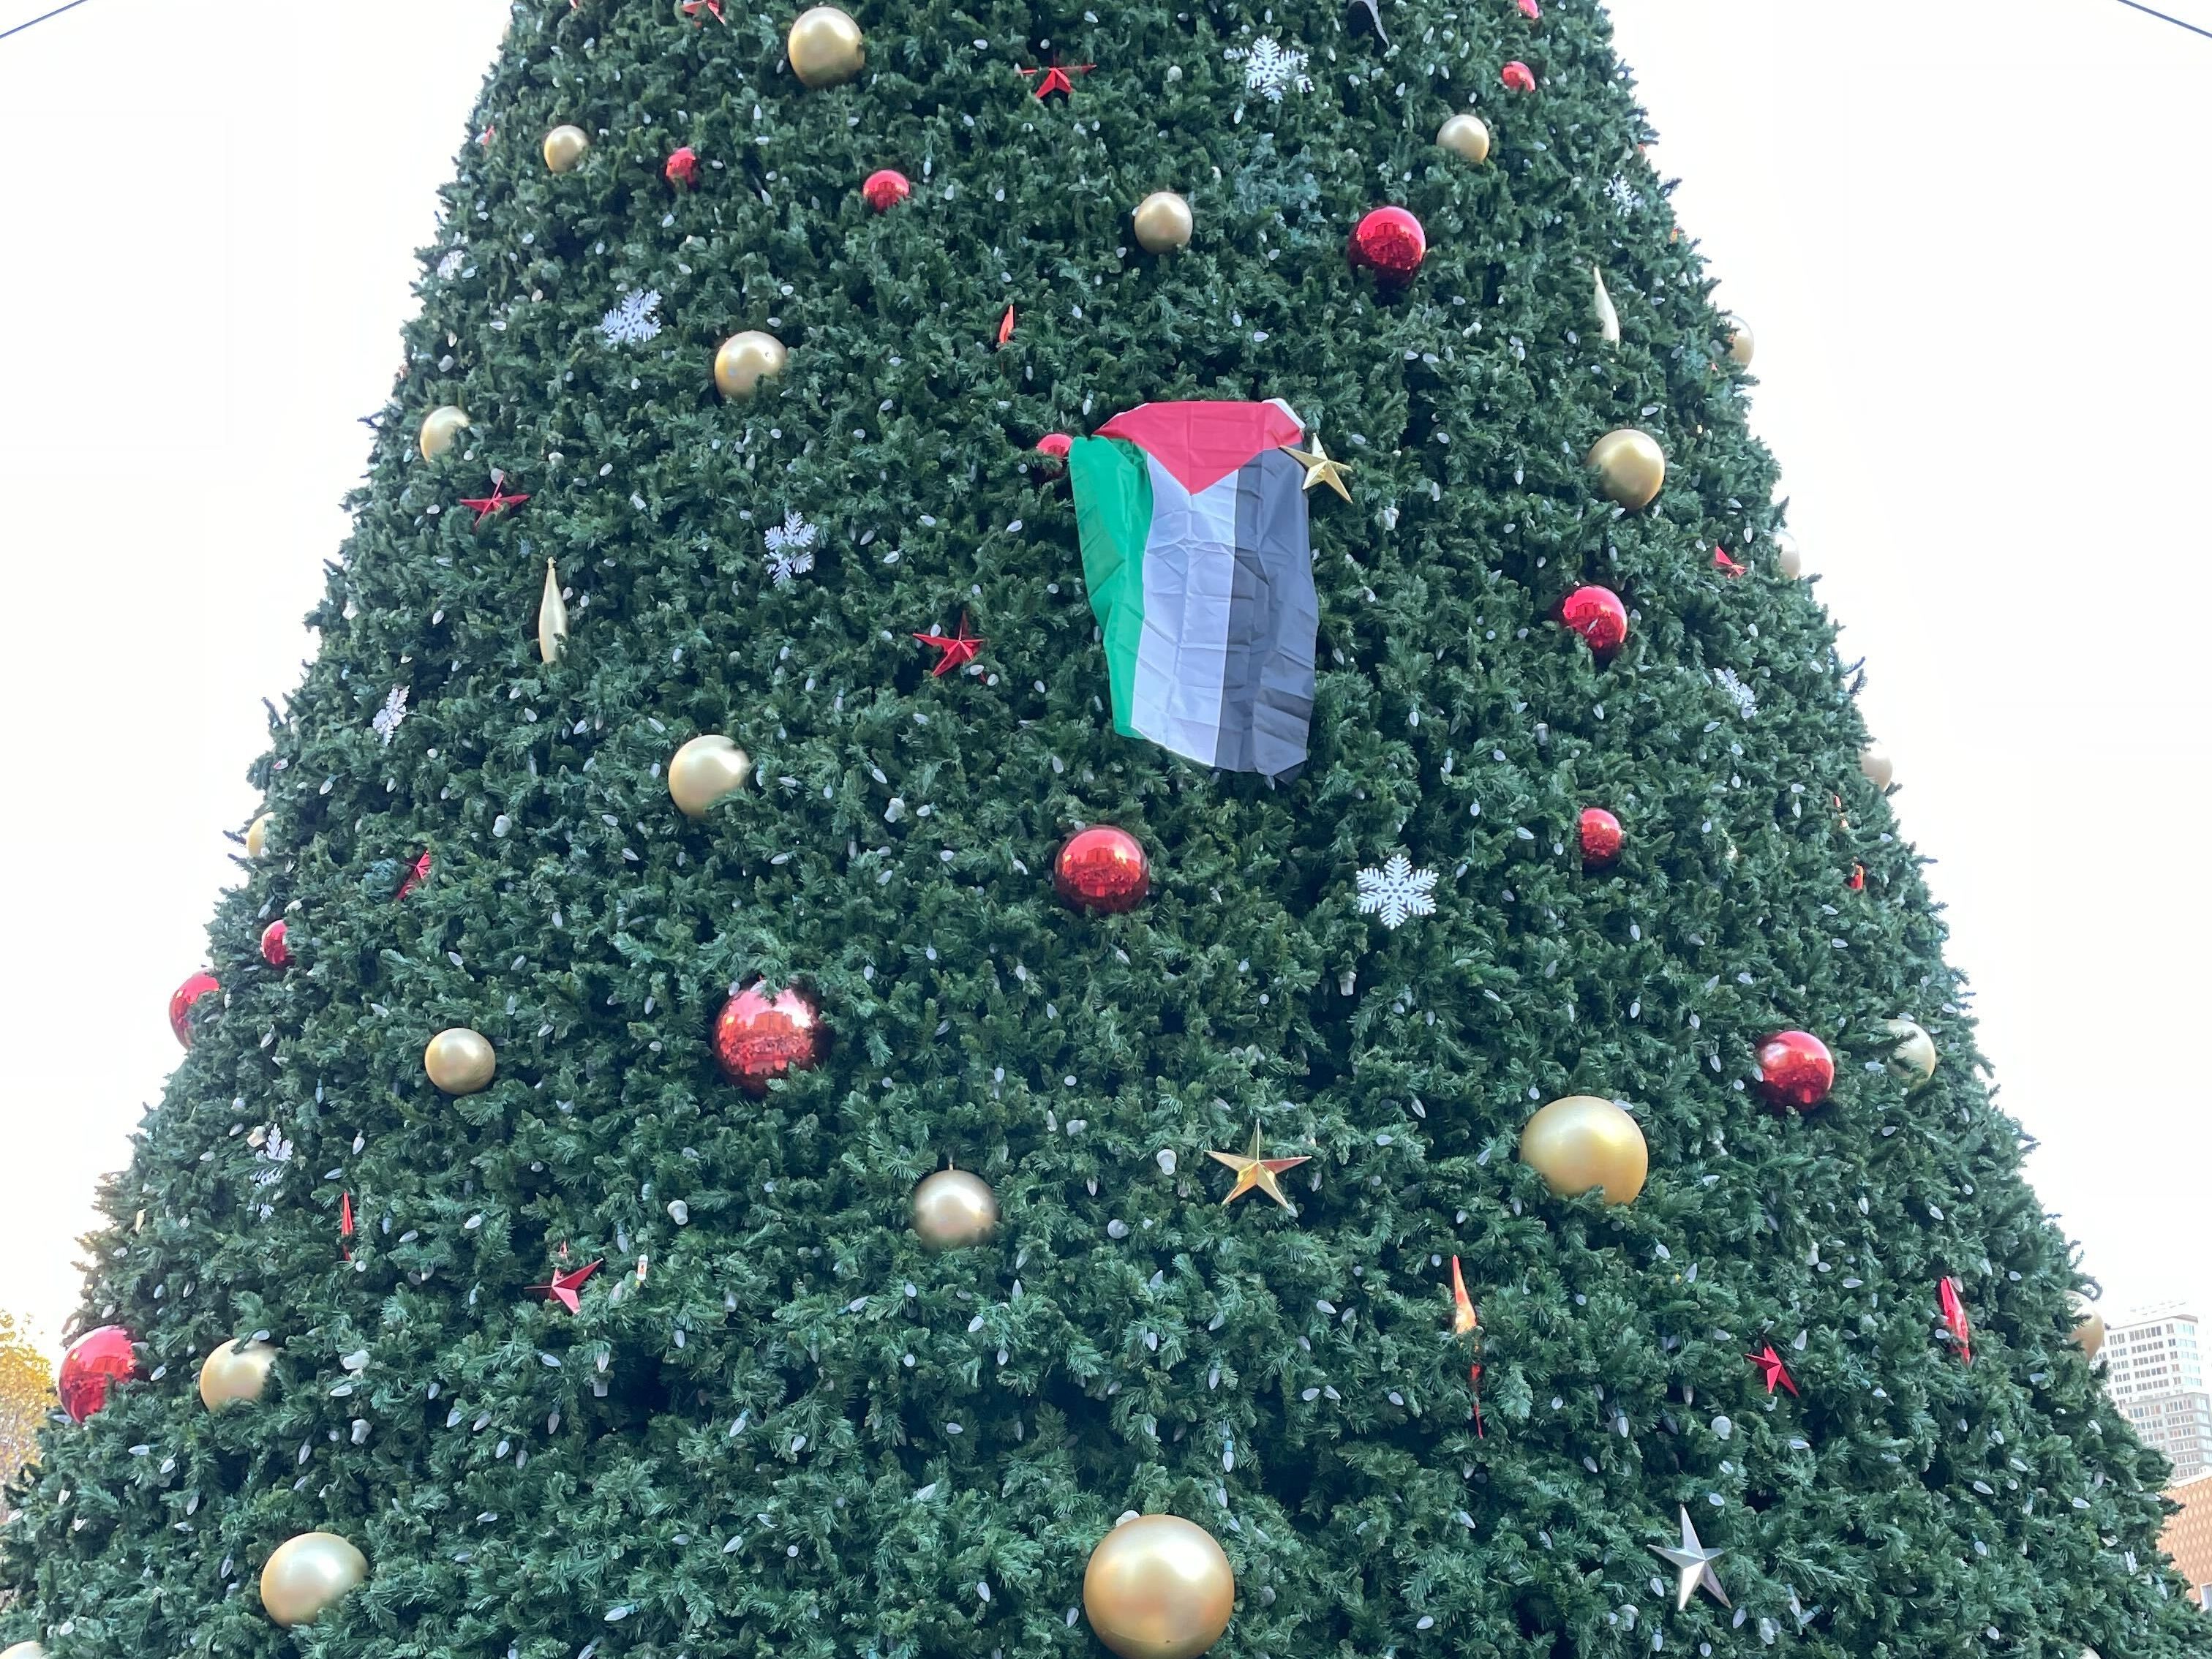 A large Christmas tree decorated with red and gold ornaments, and a Palestinian flag in its branches.